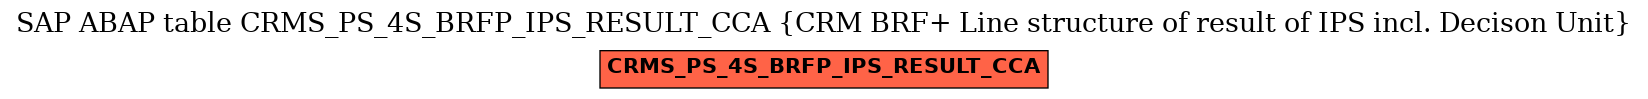 E-R Diagram for table CRMS_PS_4S_BRFP_IPS_RESULT_CCA (CRM BRF+ Line structure of result of IPS incl. Decison Unit)